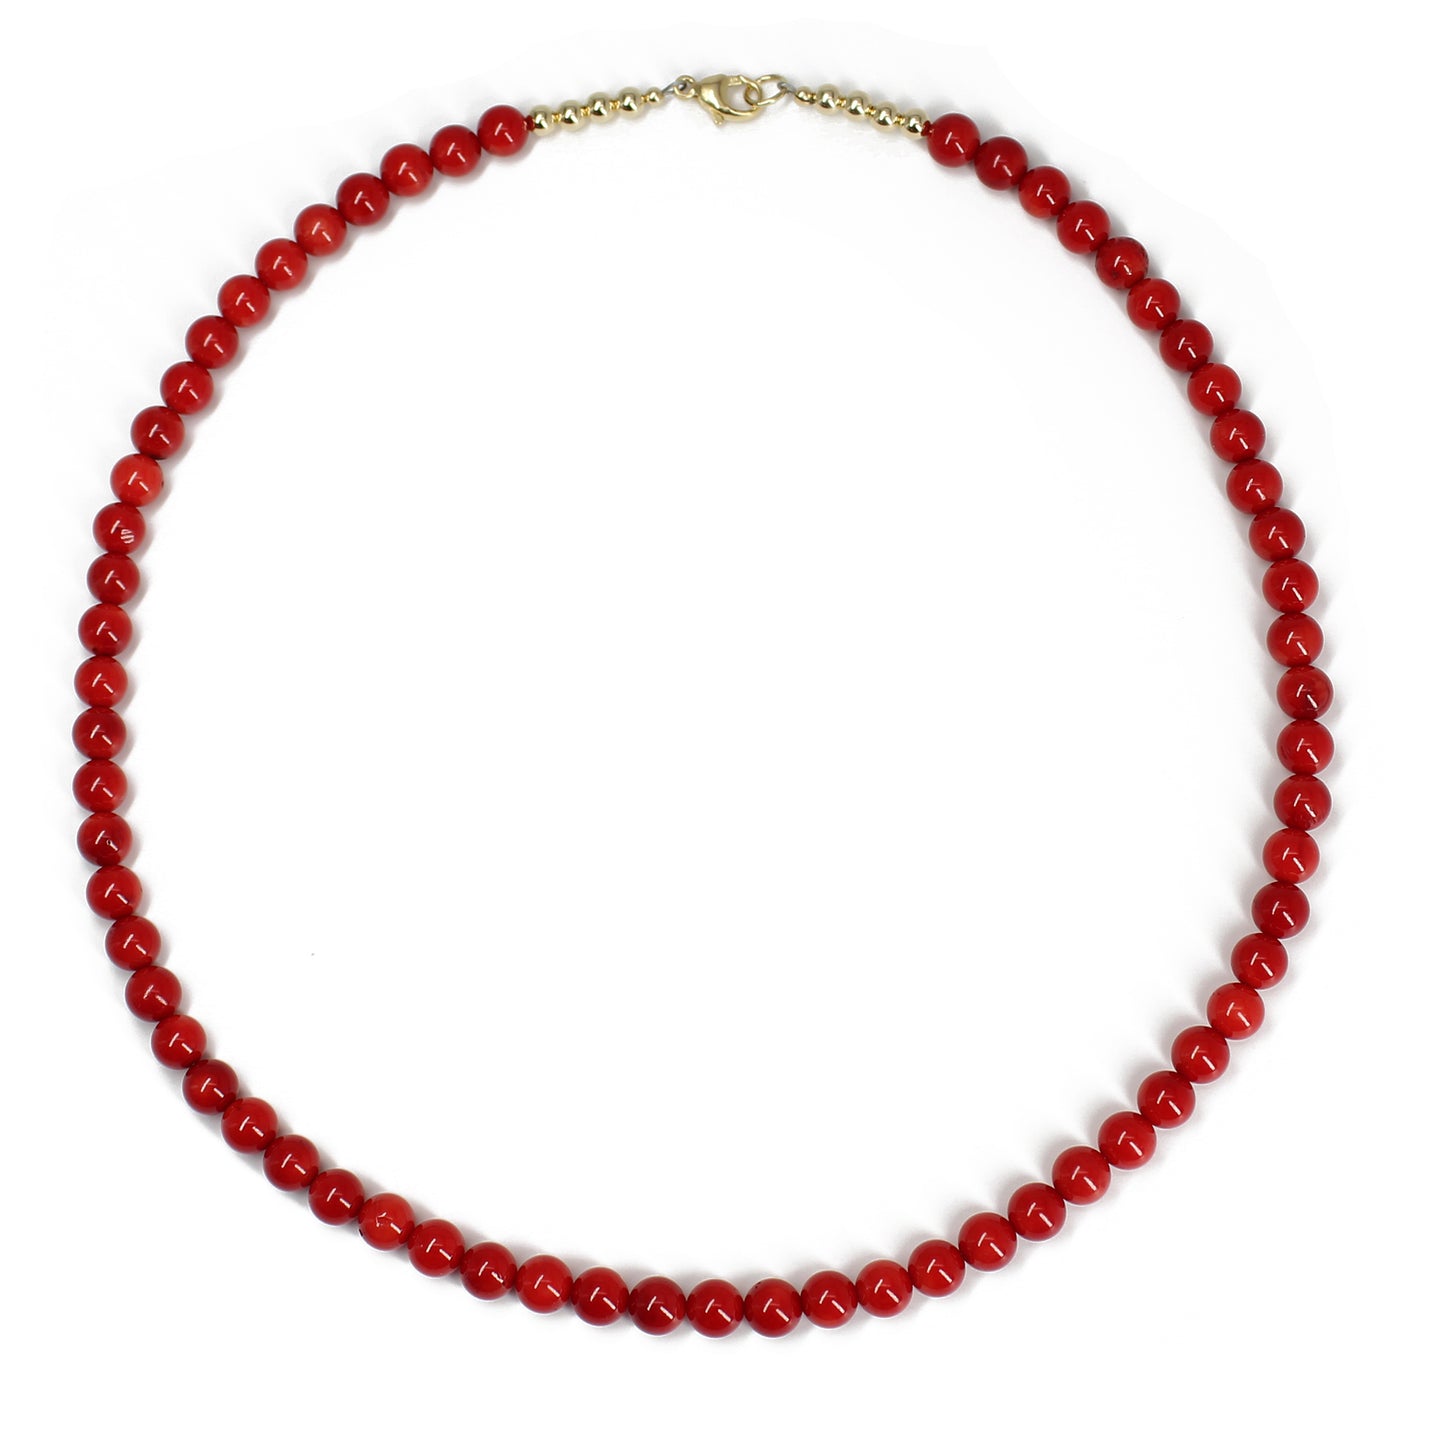 Genuine AAA 6mm Red Bamboo Coral Necklace 18" L